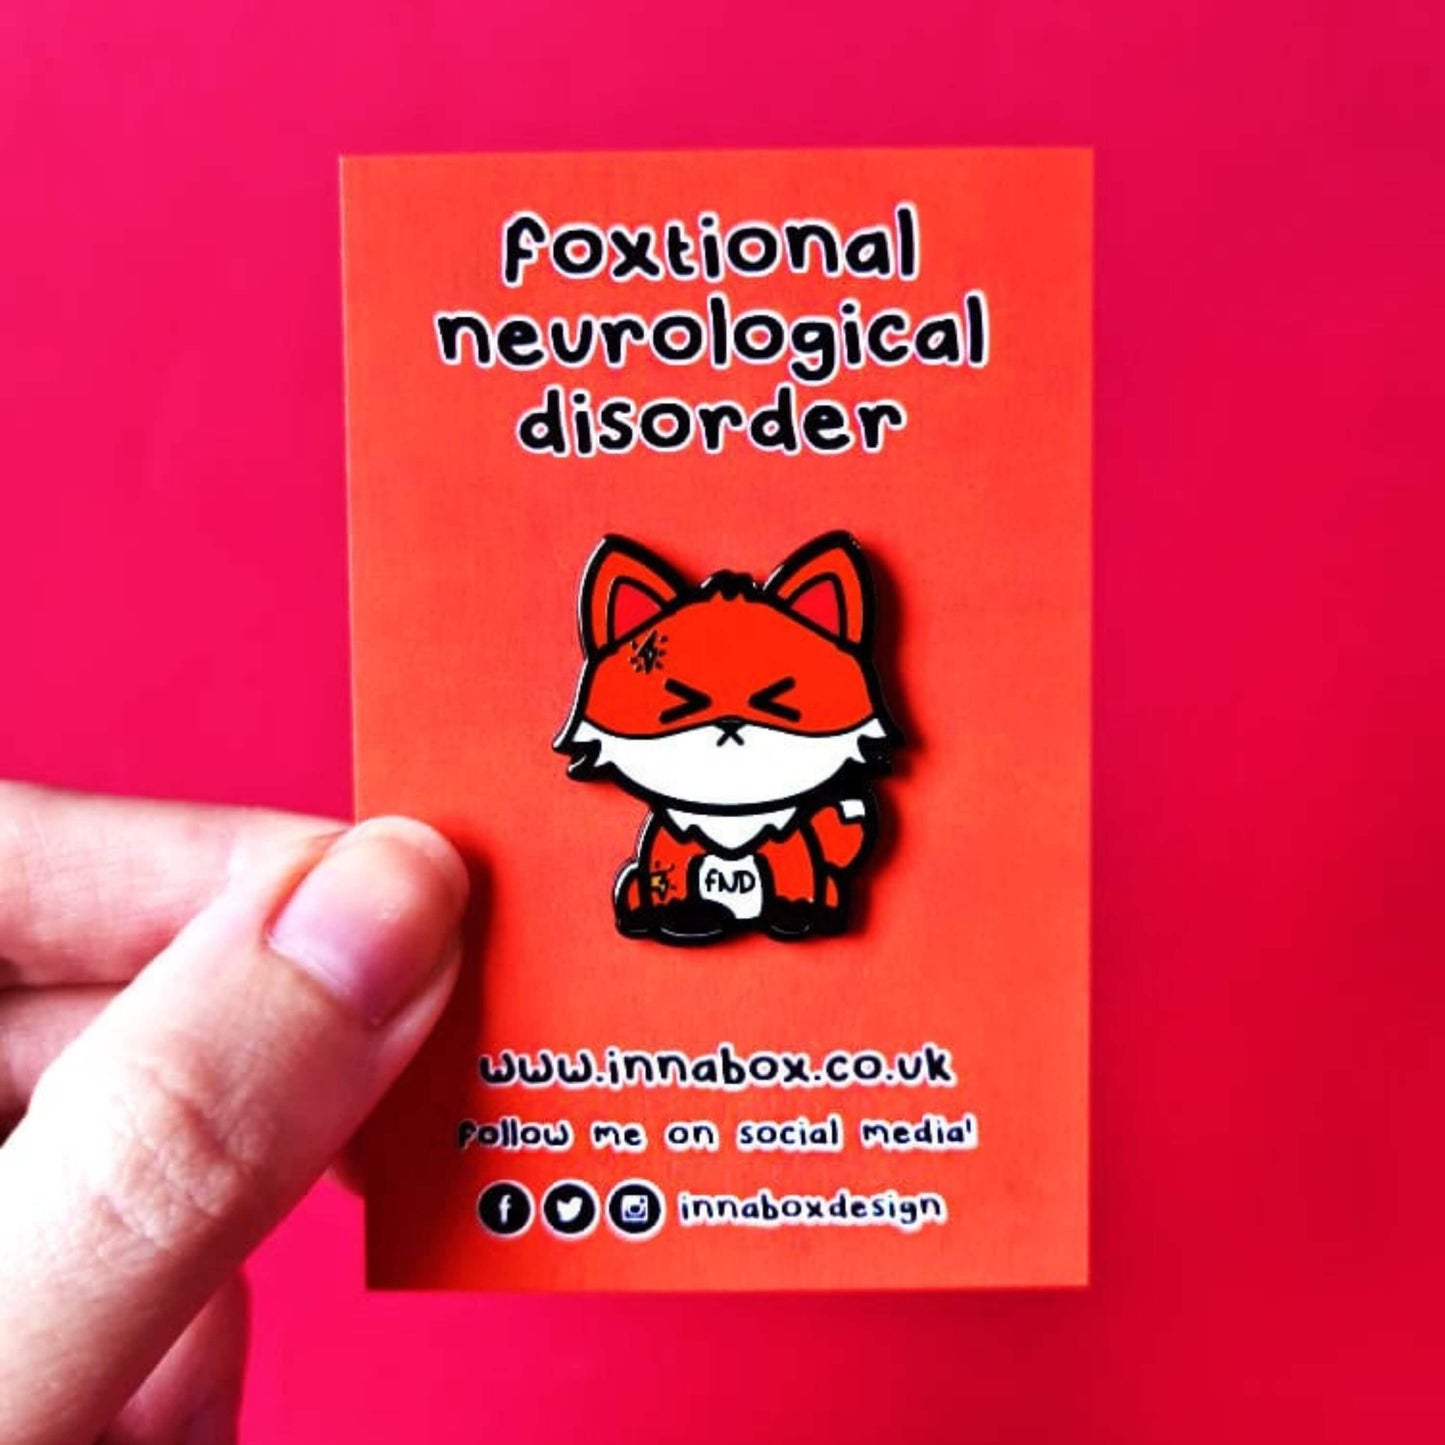 Foxtional Neurological Disorder - Functional Neurological Disorder (FND) Enamel Pin on orange backing card held in front of a red background. The enamel pin is a fox with a pained expression on its face and yellow lightning illustration on its head and arm. The enamel pin is designed to raise awareness for Functional Neurological Disorder (FND)